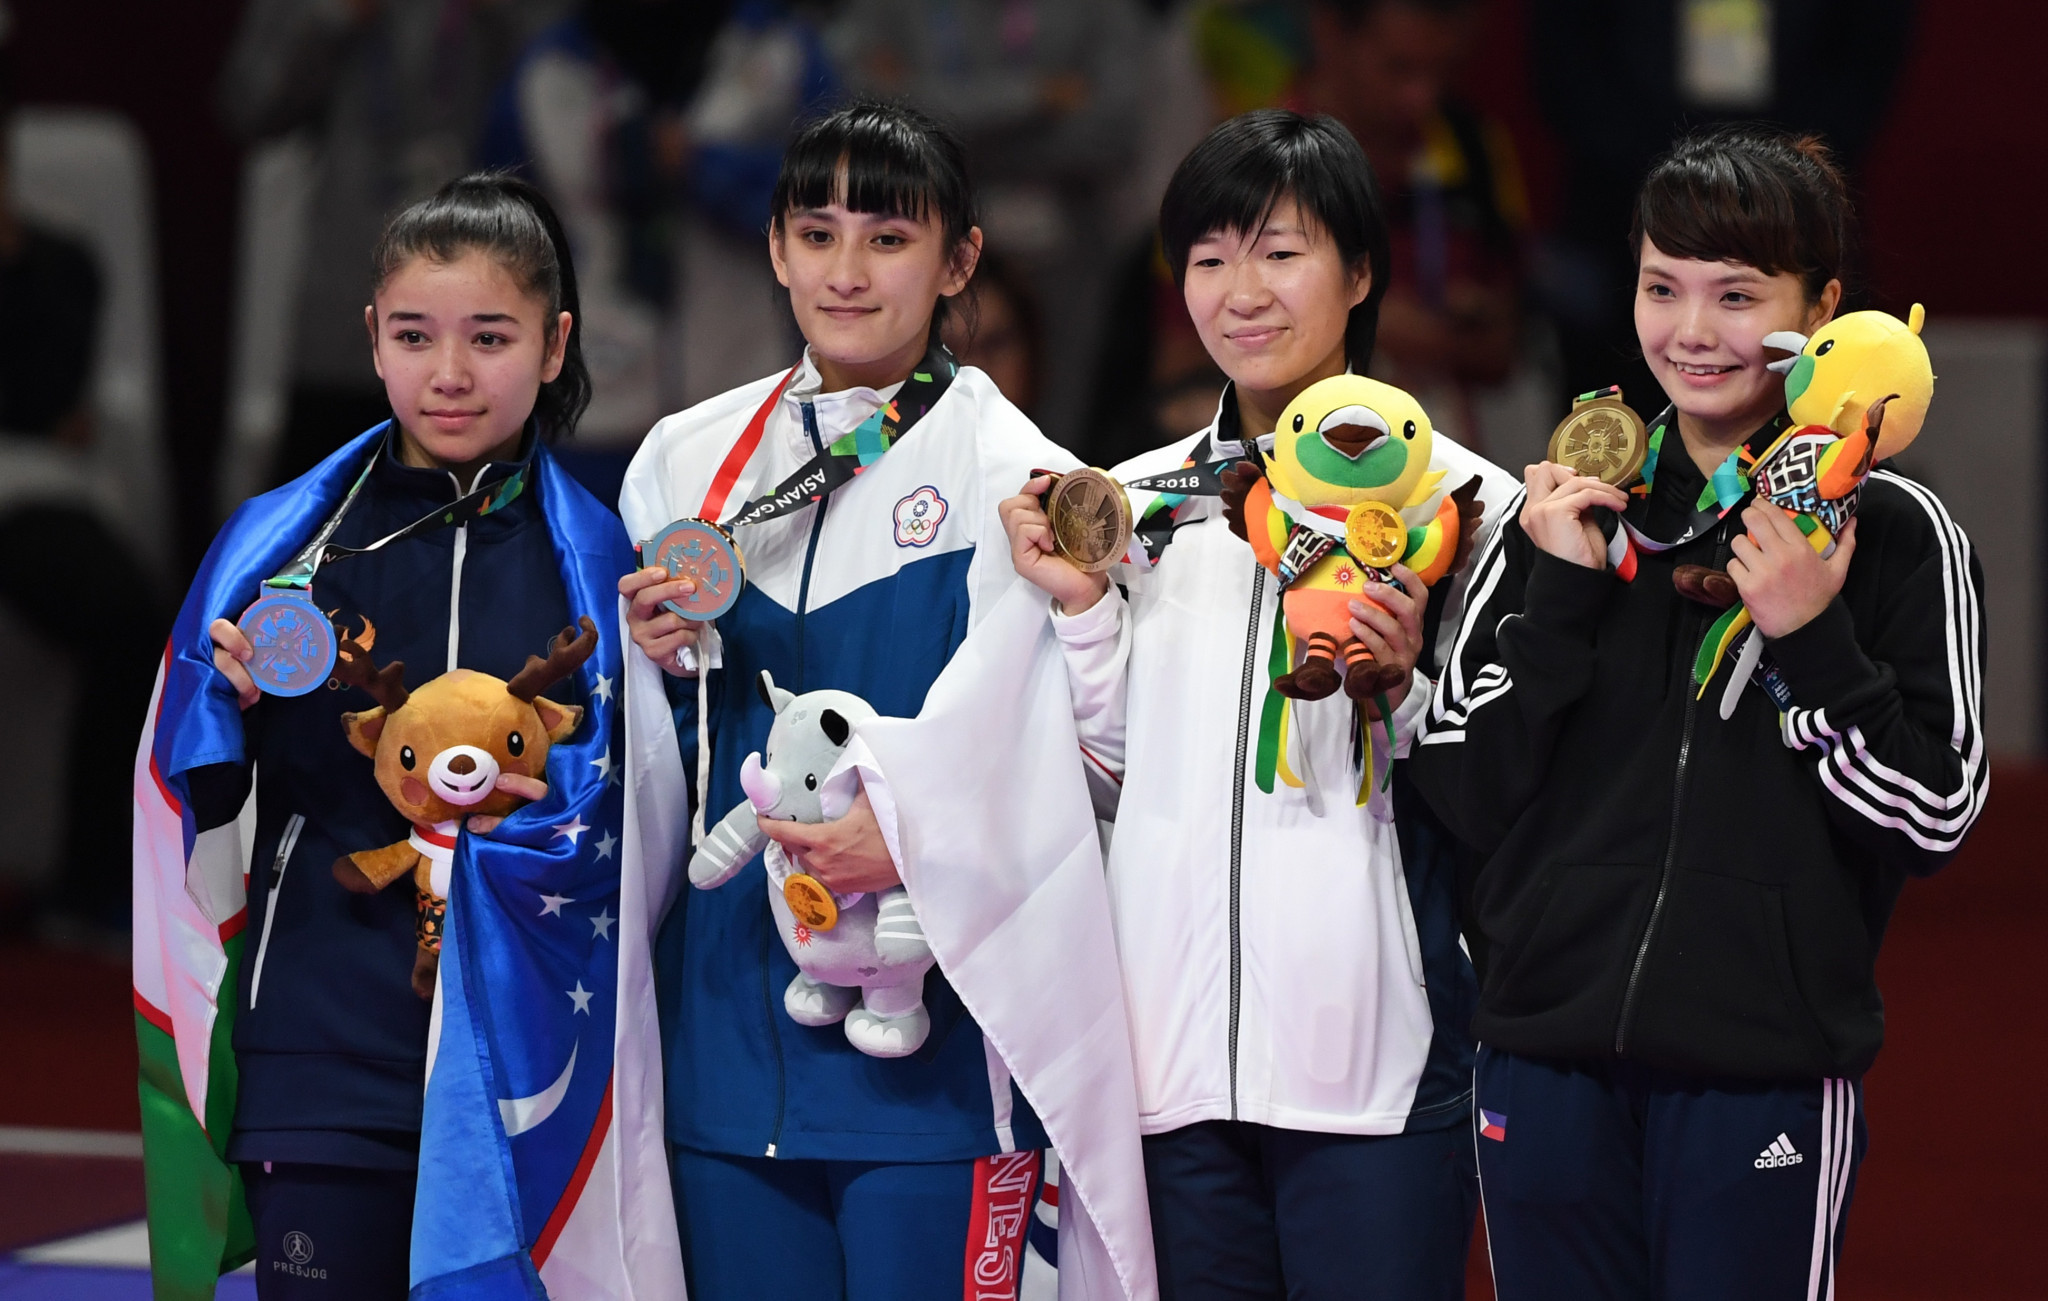 Junna Tsukii, far right, won a bronze medal at the 2018 Asian Games - the Philippines' only medal in the sport ©Getty Images